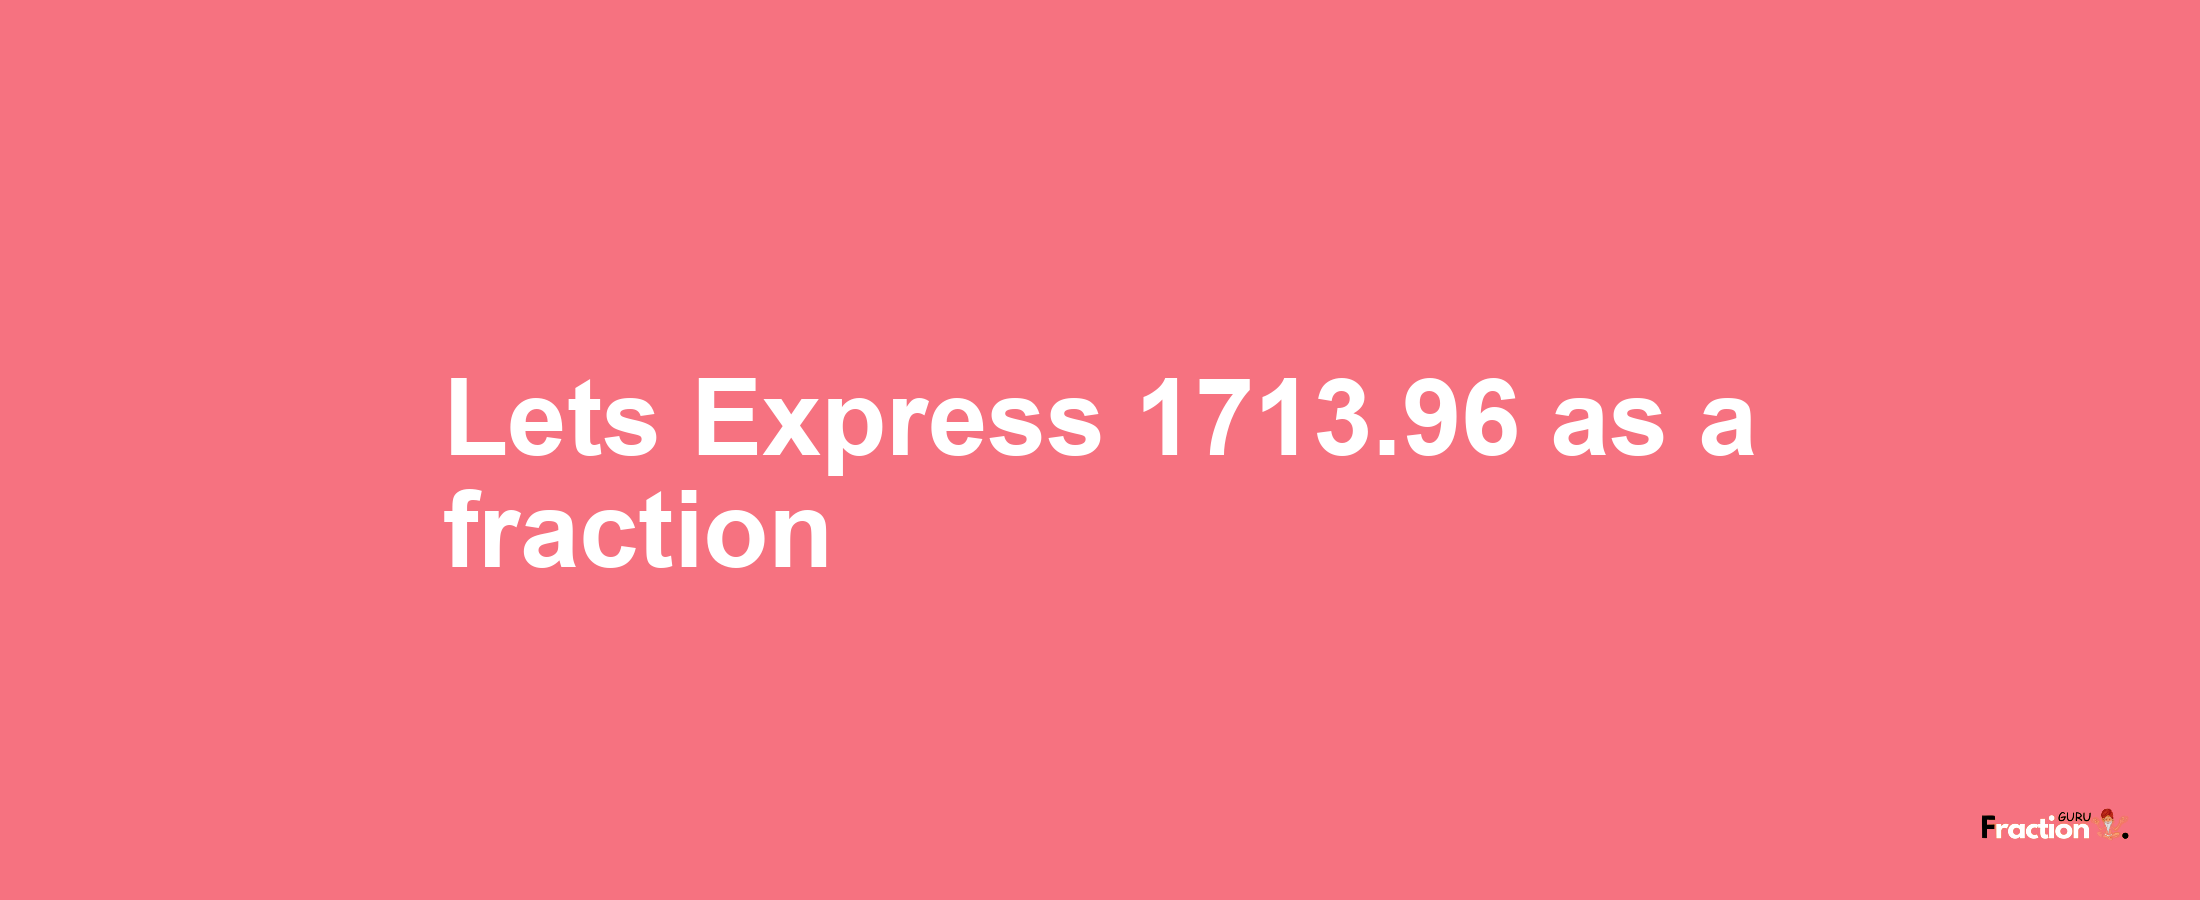 Lets Express 1713.96 as afraction